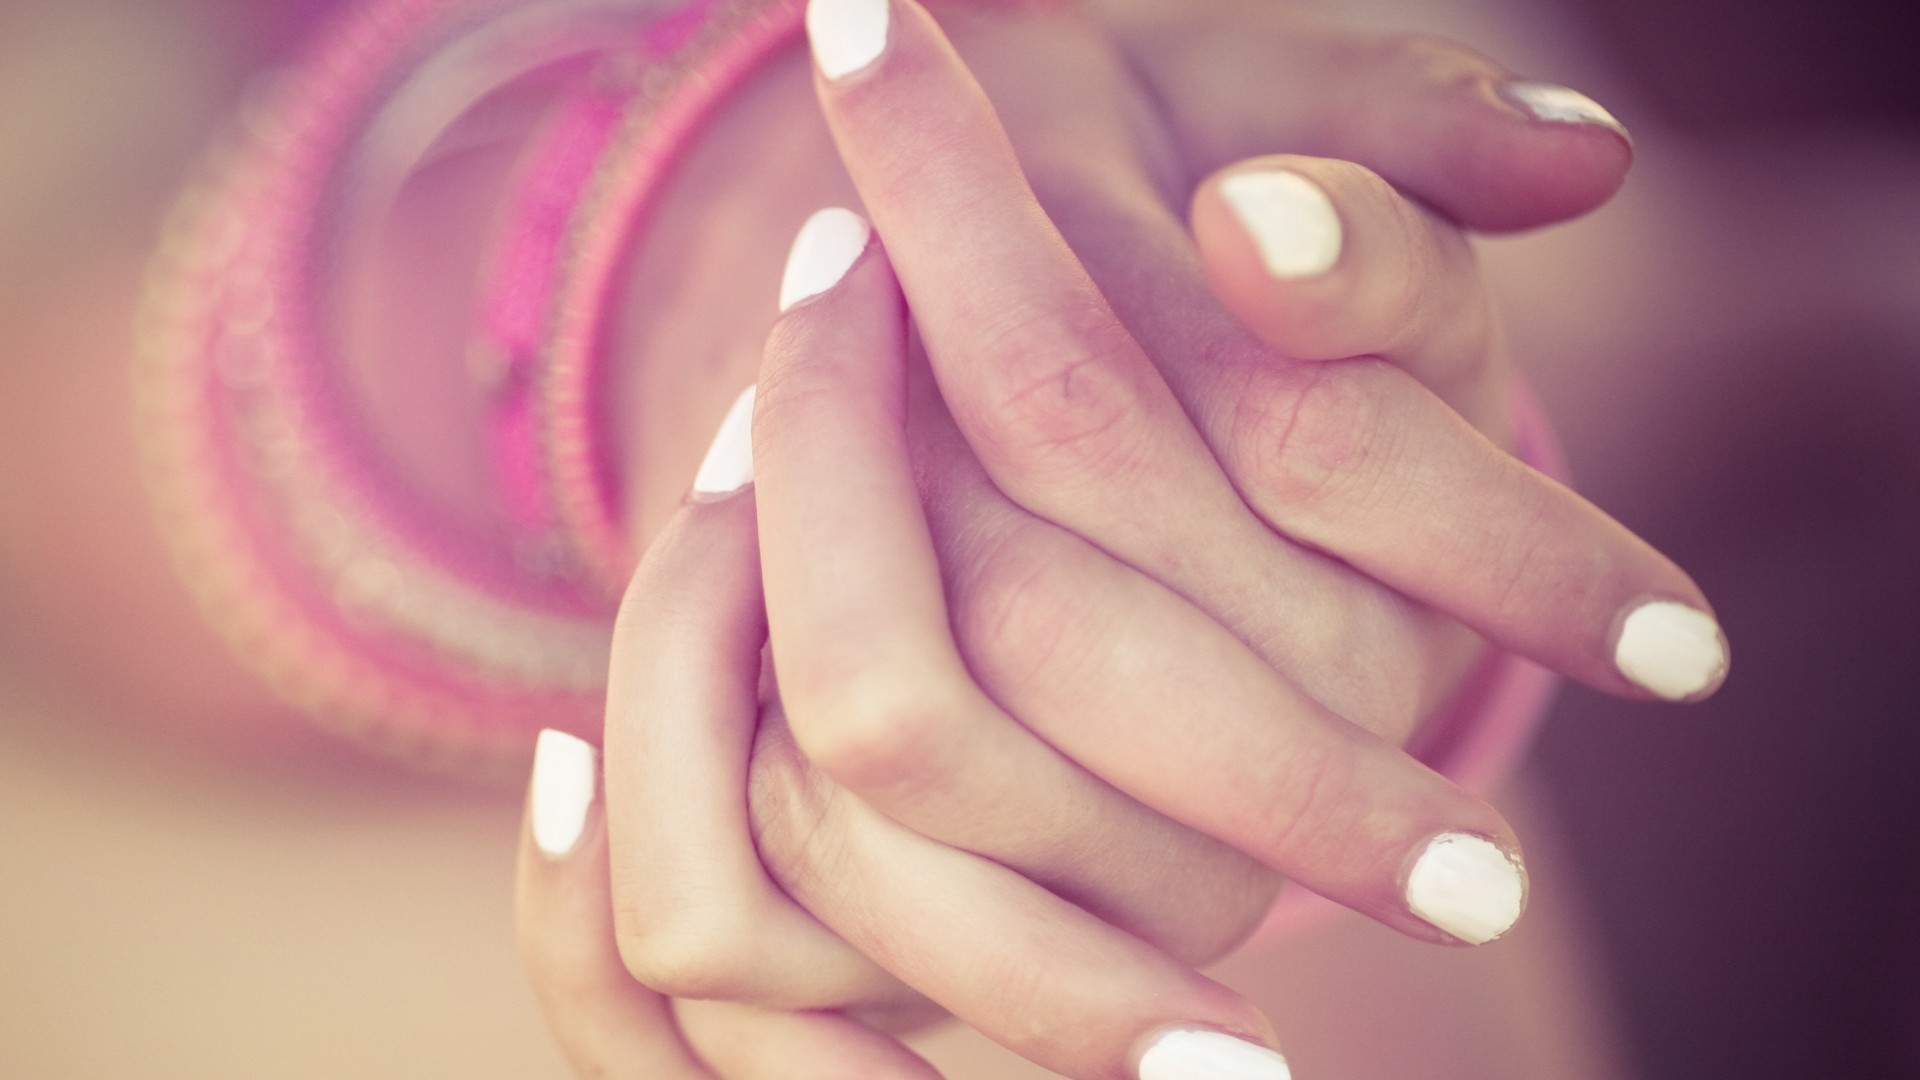 People 1920x1080 depth of field hands fingers painted nails holding hands women